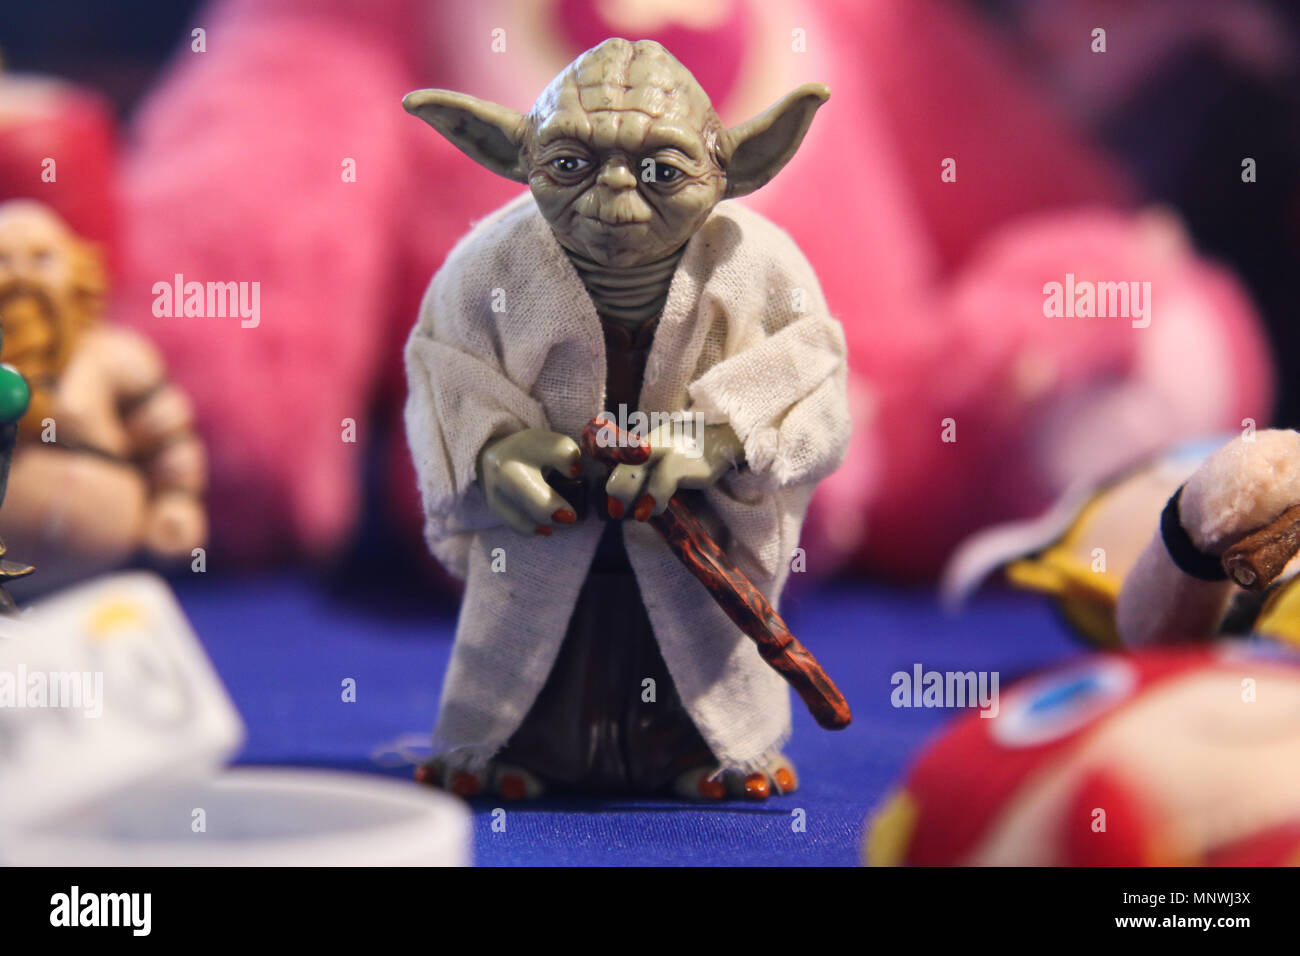 Salvador, Brazil. 19th May, 2018. Miniature of the character Yoda of Star Wars in technology fair Campus Party, in Salvador, Ba. Credit: Tiago Caldas/FotoArena/Alamy Live News Stock Photo